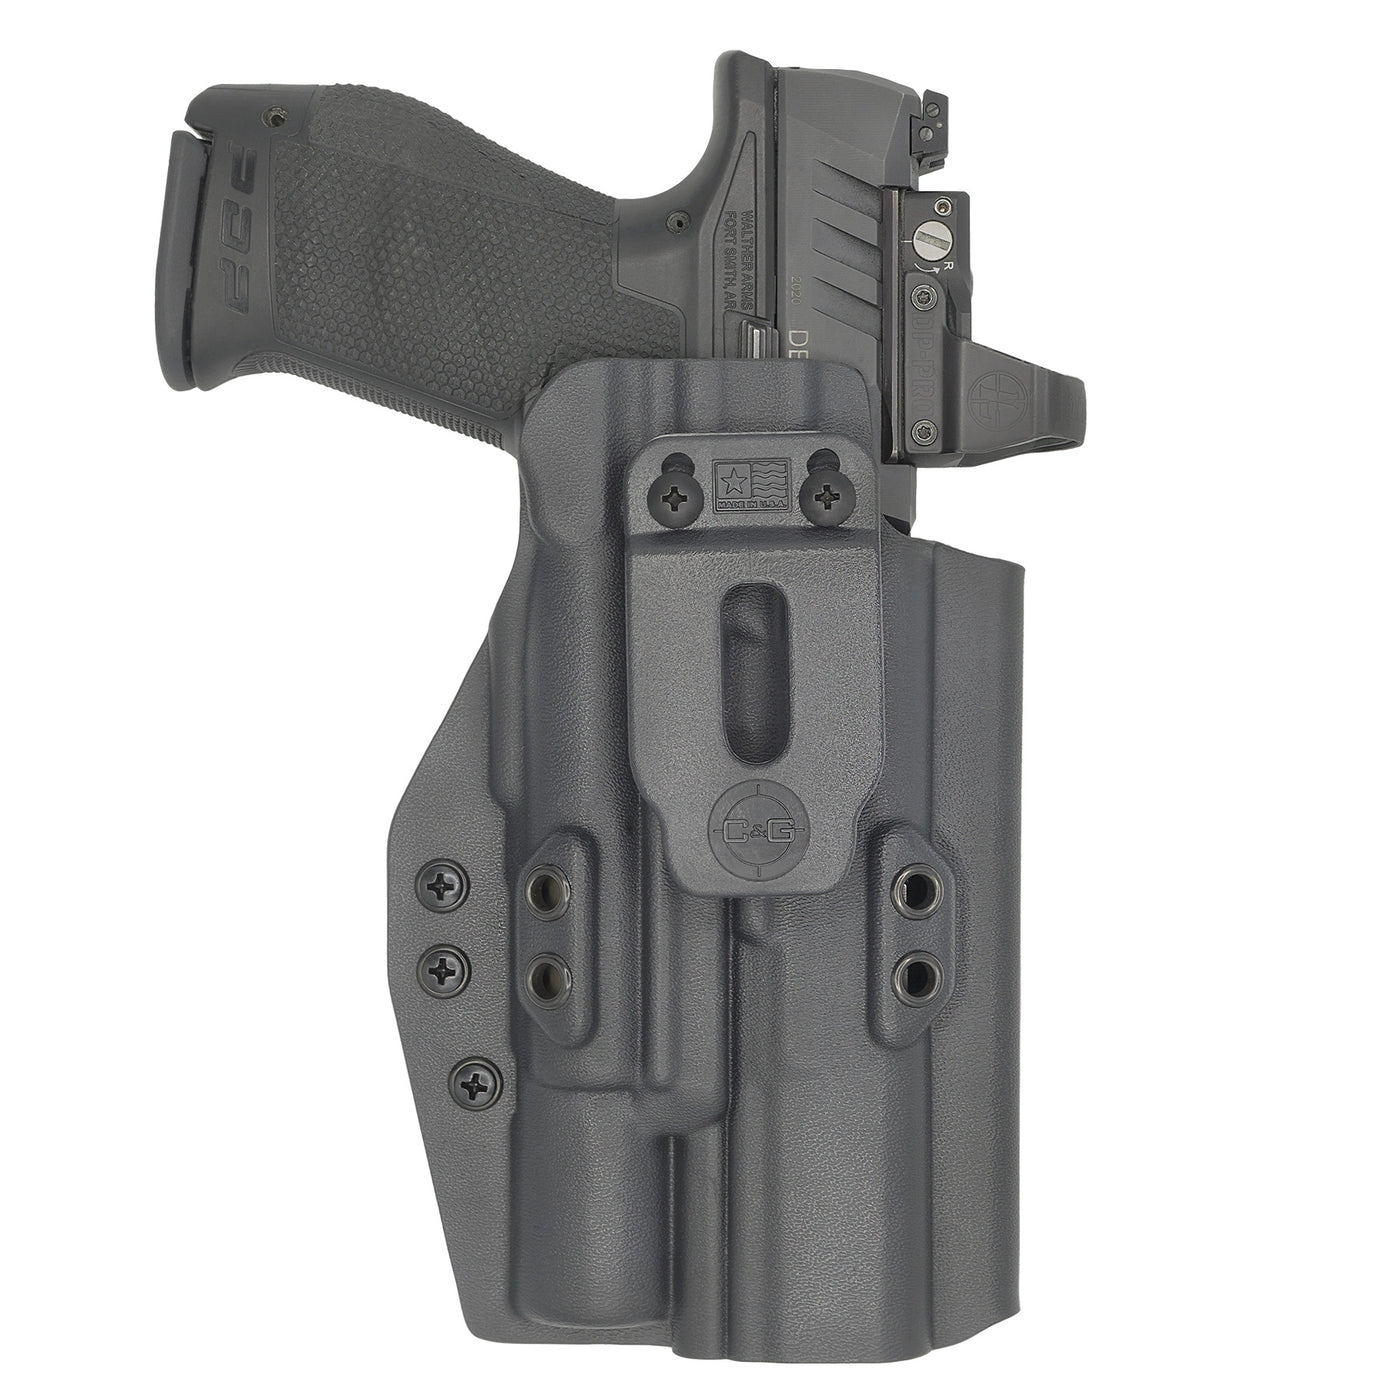 C&G Holsters quickship IWB Tactical CZ P07/09 Surefire X300 in holstered position